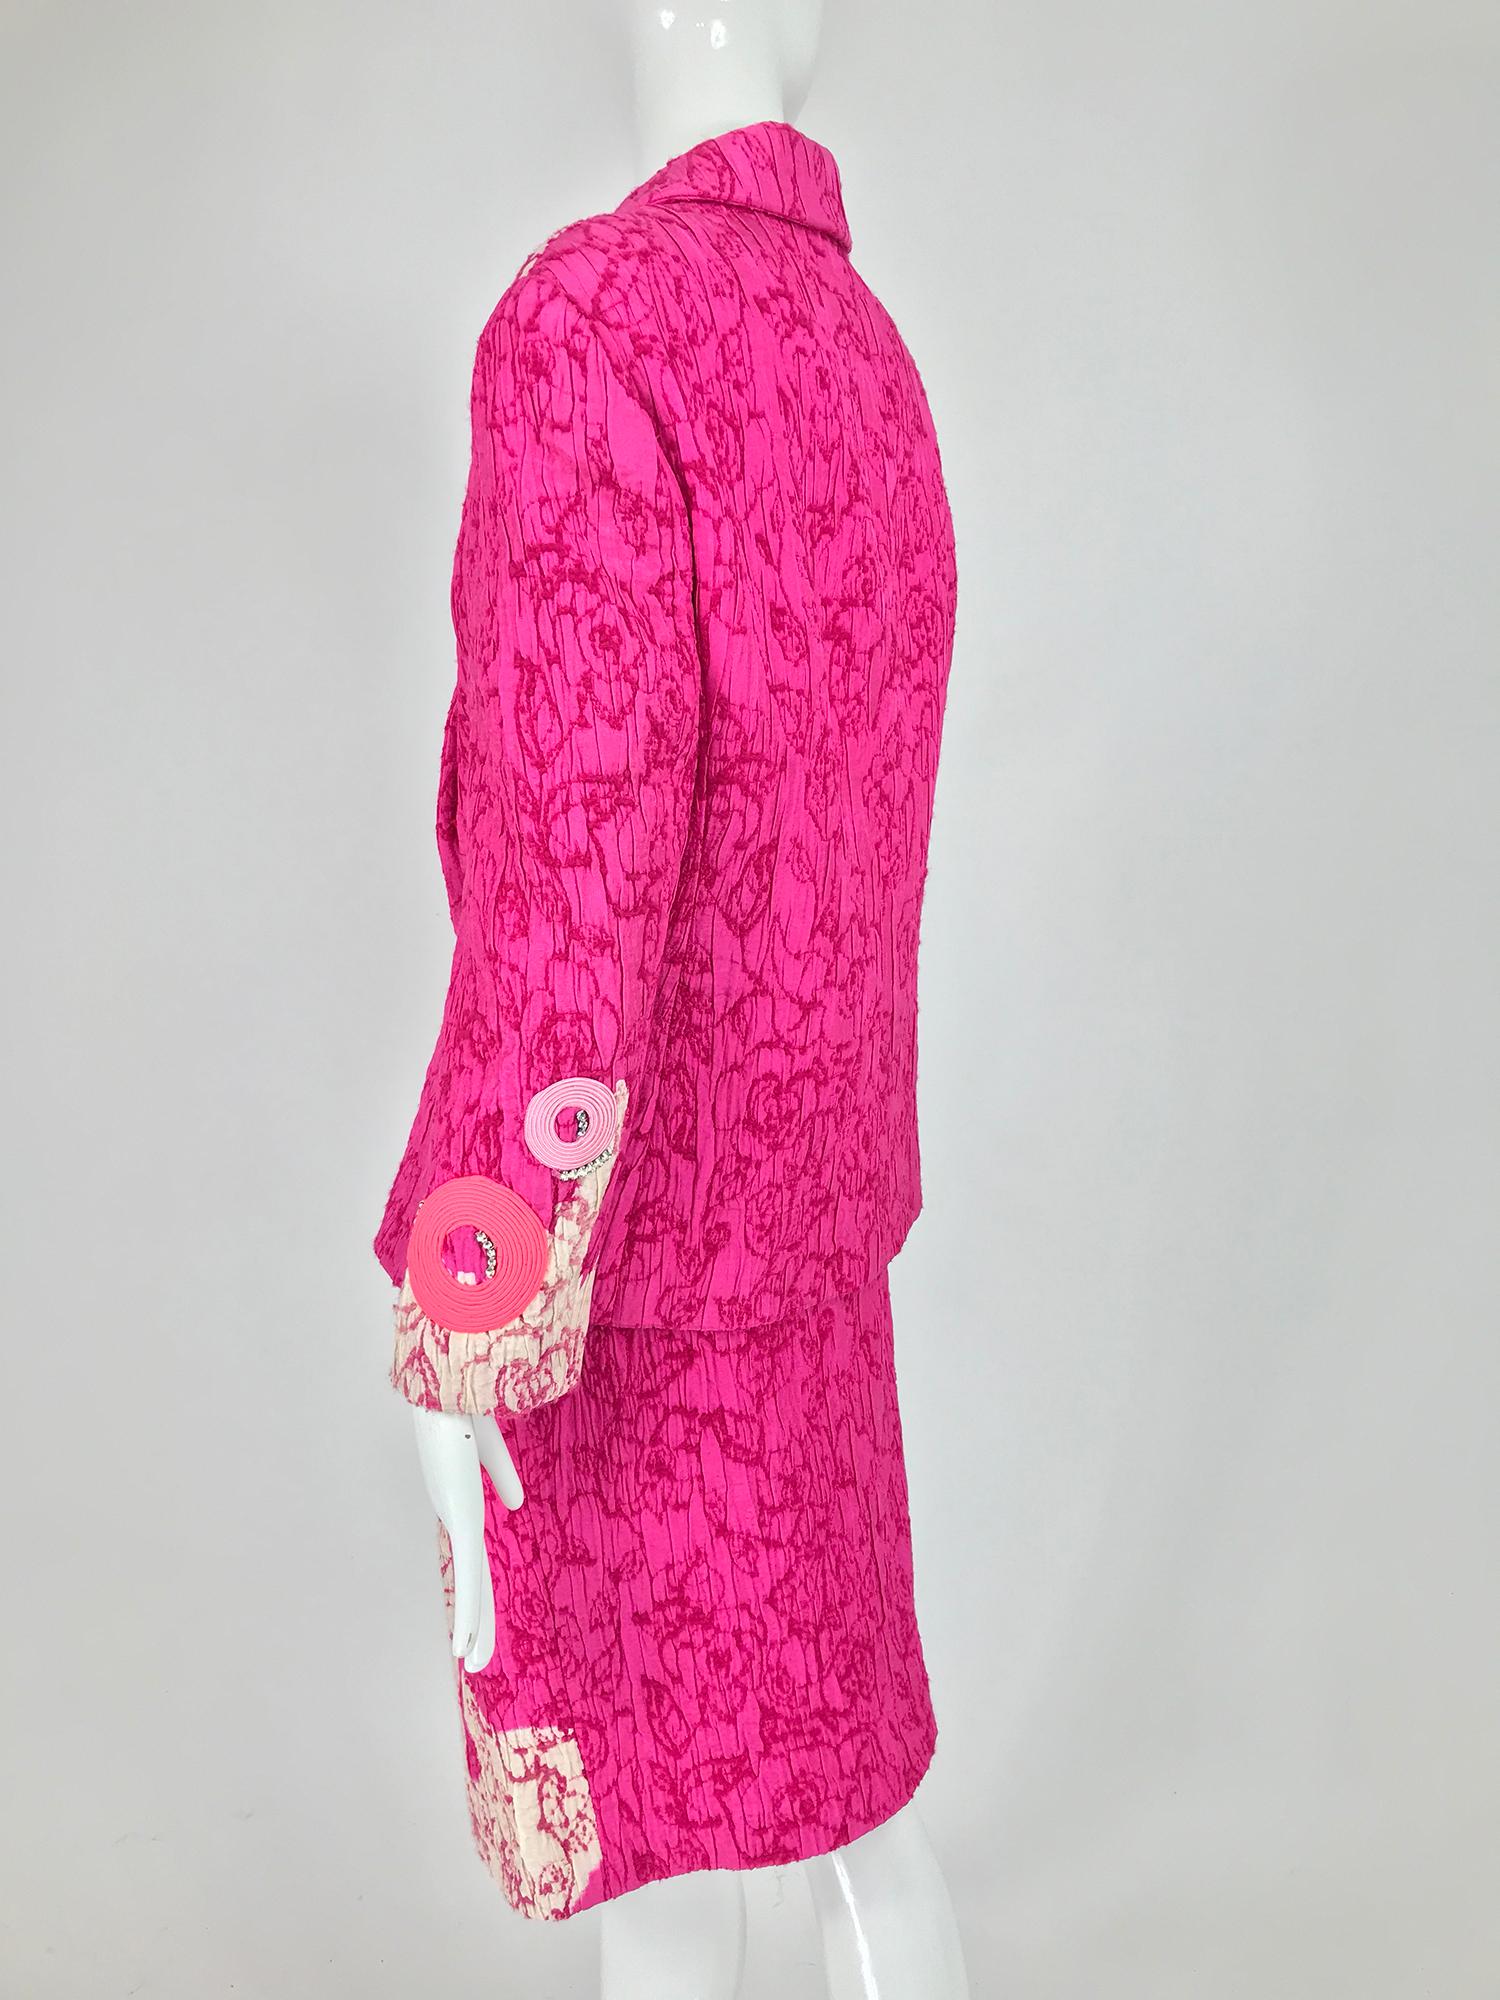 Christian Lacroix Pink Embroidered Silk Applique Skirt Suit 1990s For Sale 7